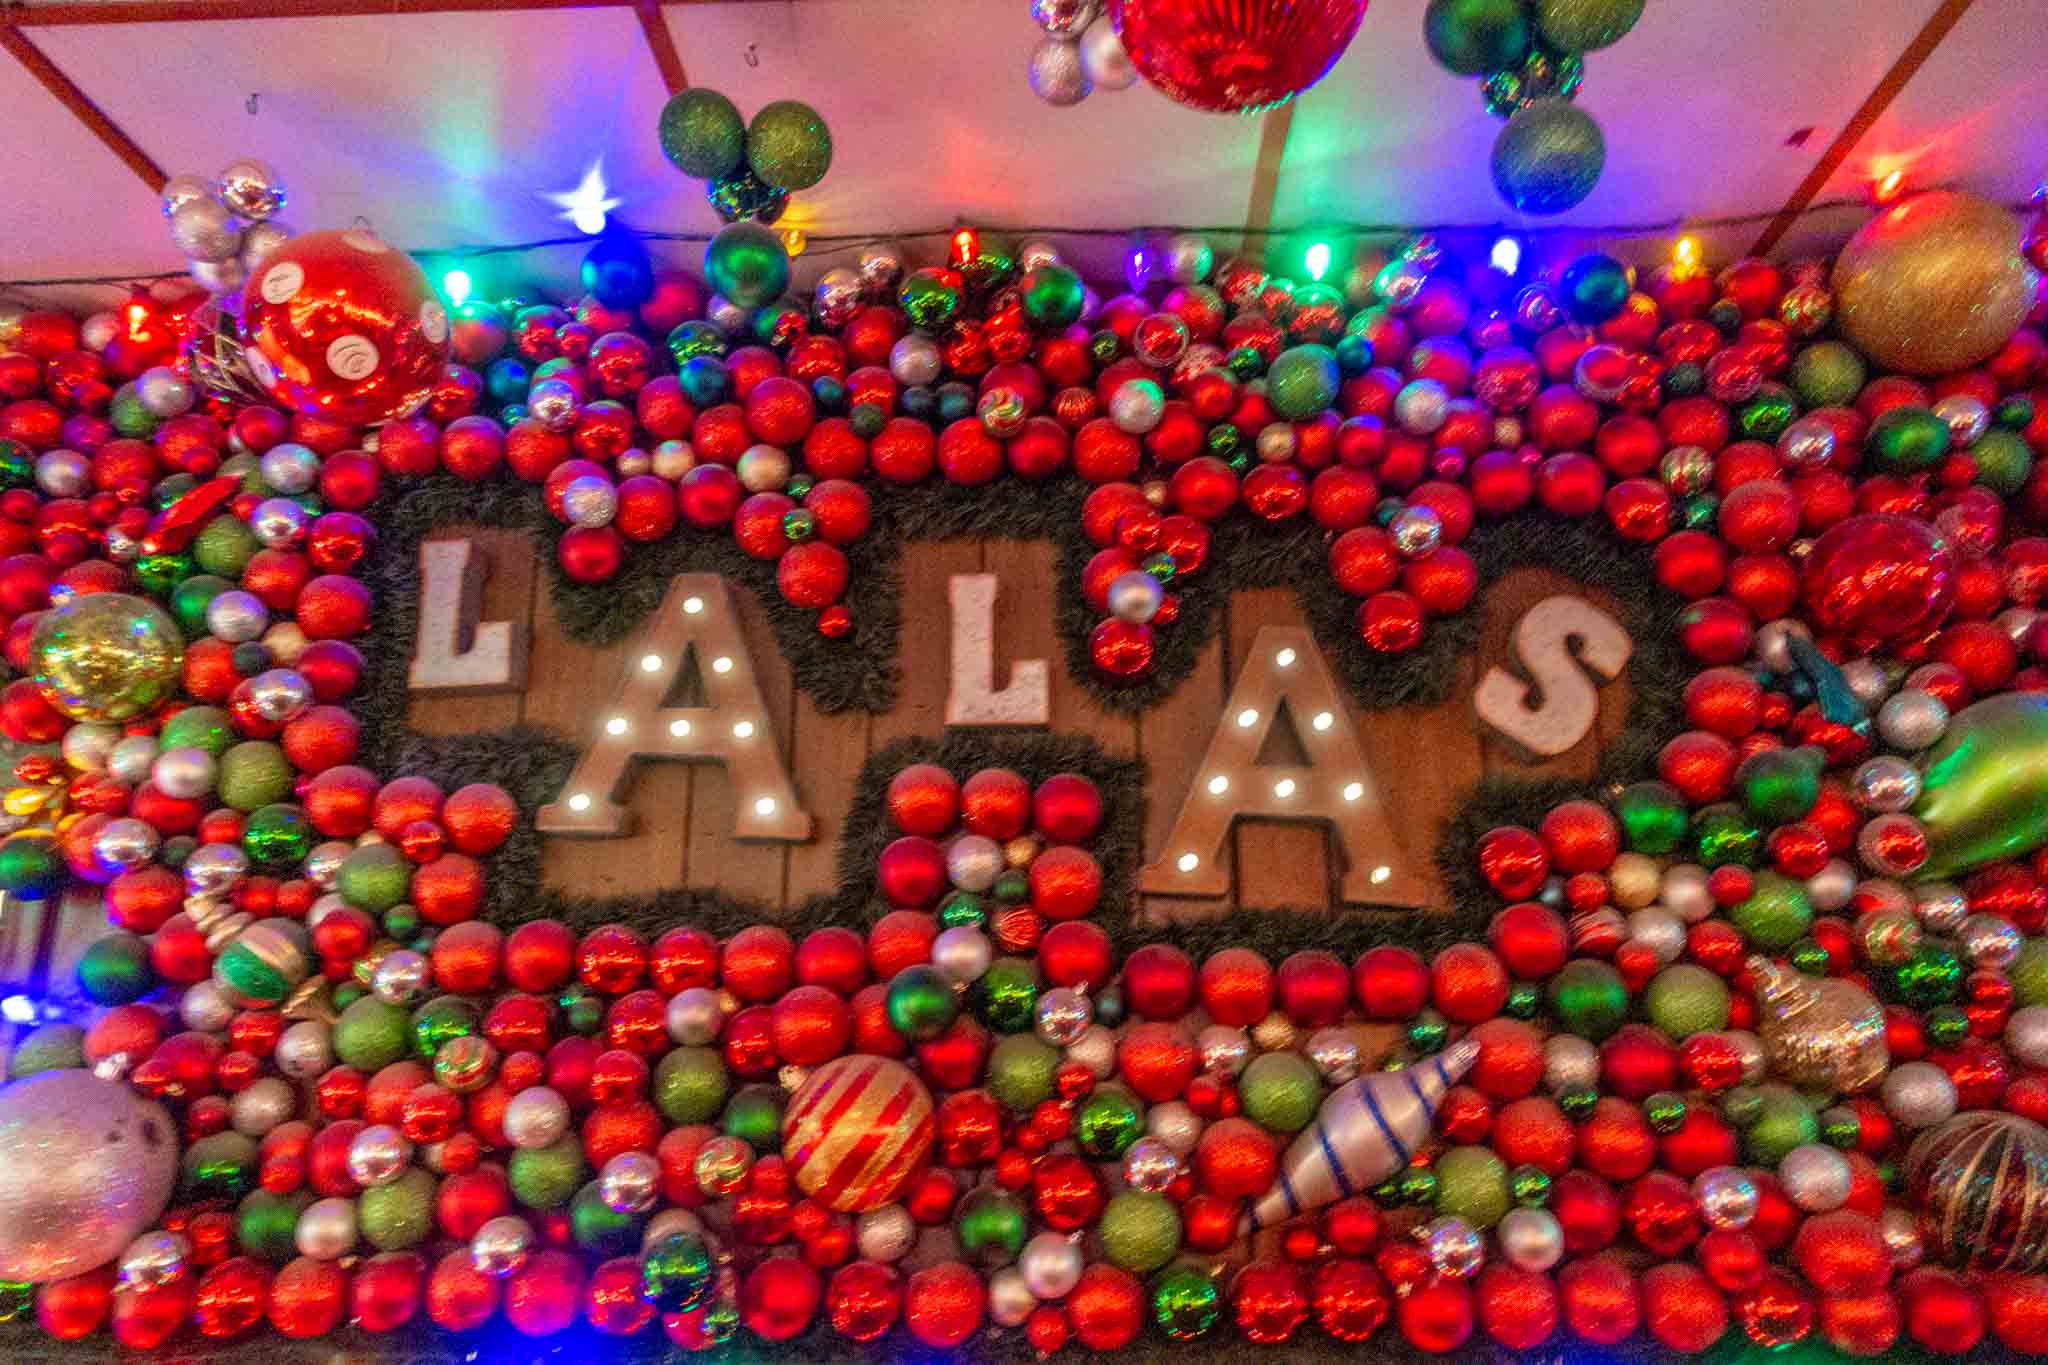 Sign made of Christmas ornaments: Lala's